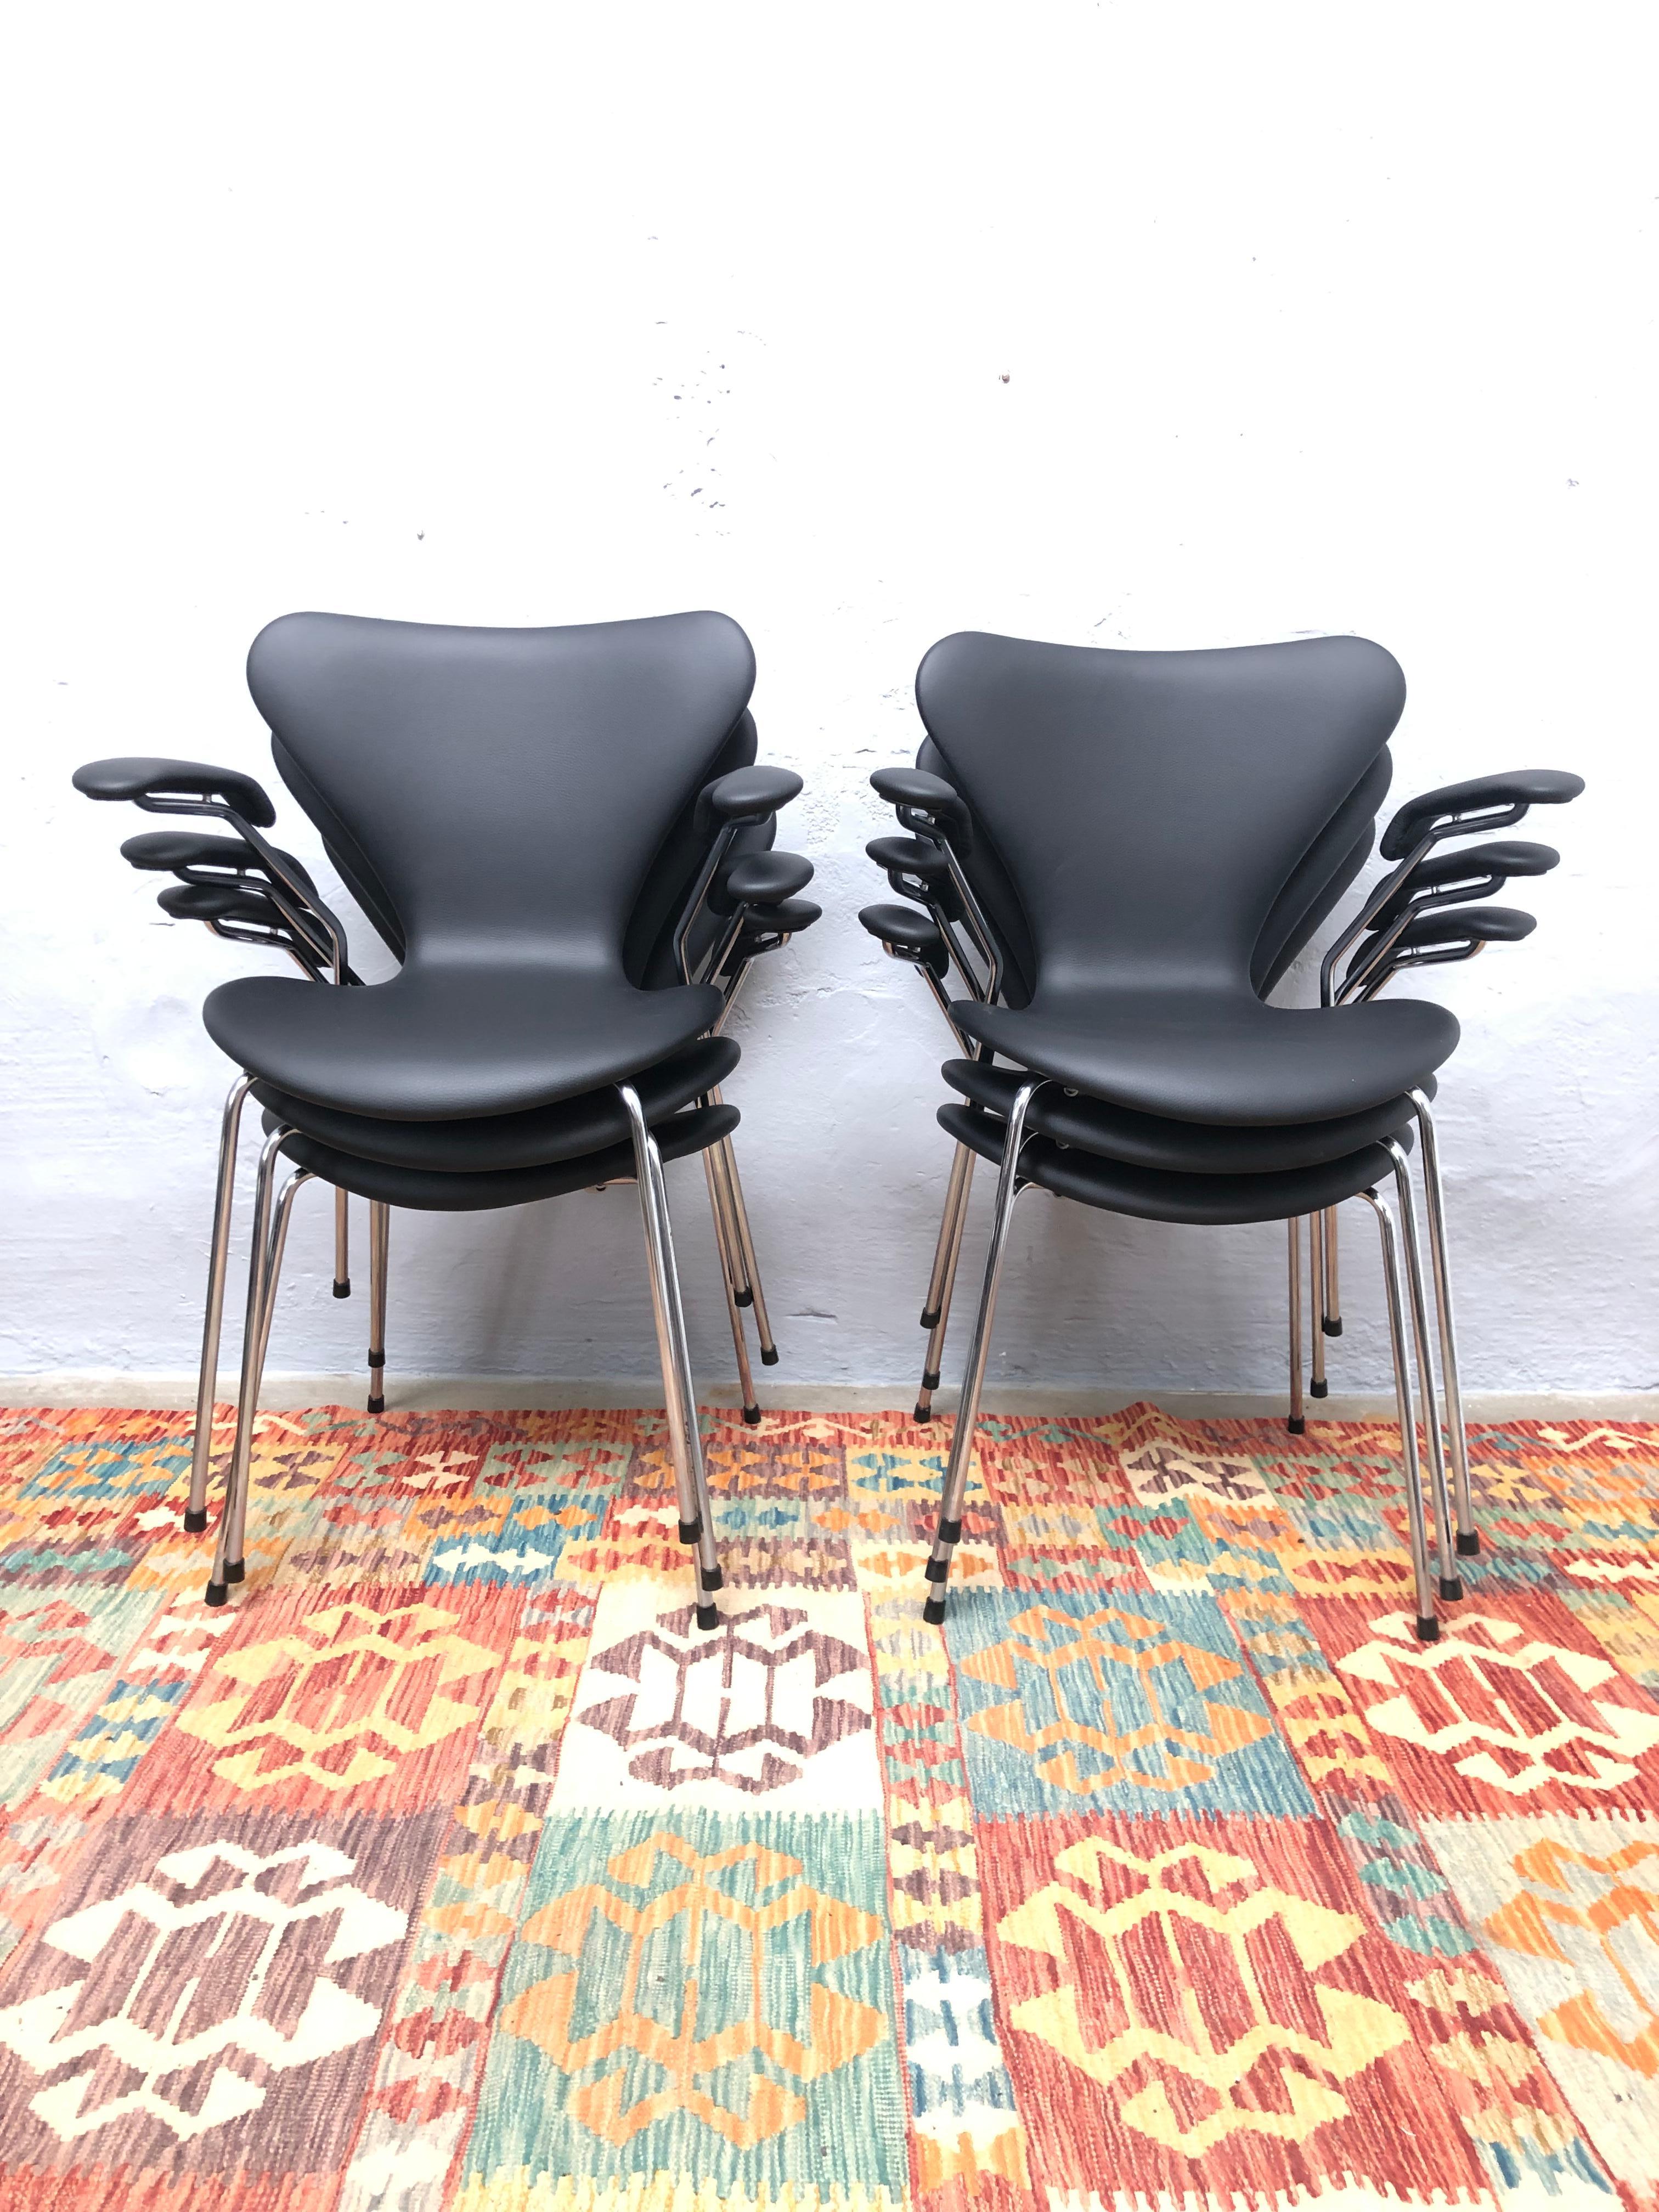 A vintage set of 6 chairs model 3207 chairs by Arne Jacobsen for Fritz Hansen of Denmark from 1980s in classic black leather.
These chairs are in extremely good vintage condition for their age and have just been reupholstered in classic black